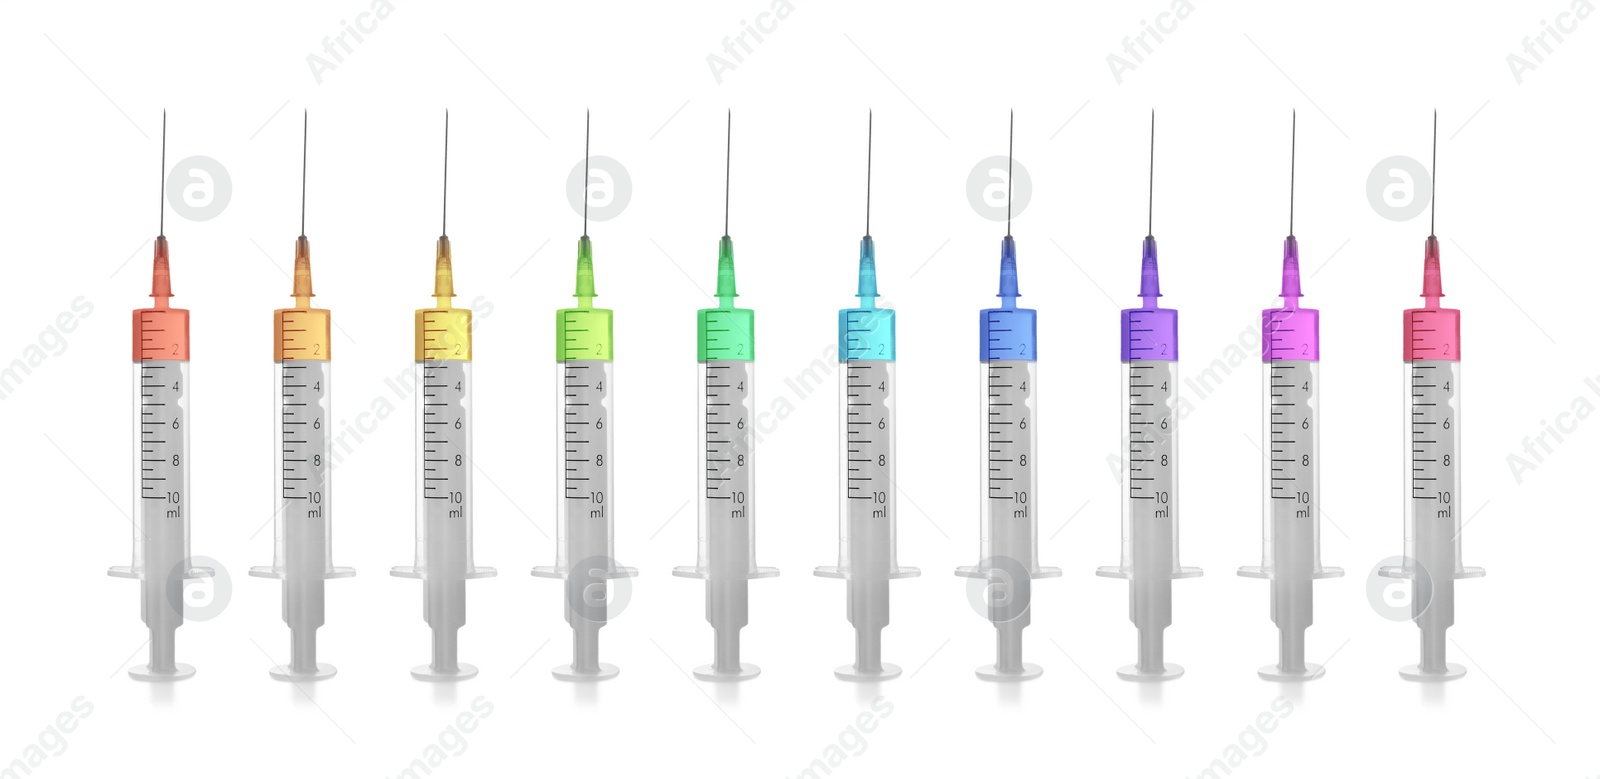 Image of Disposable syringes with needle and multicolored medicine on white background, collage. Banner design